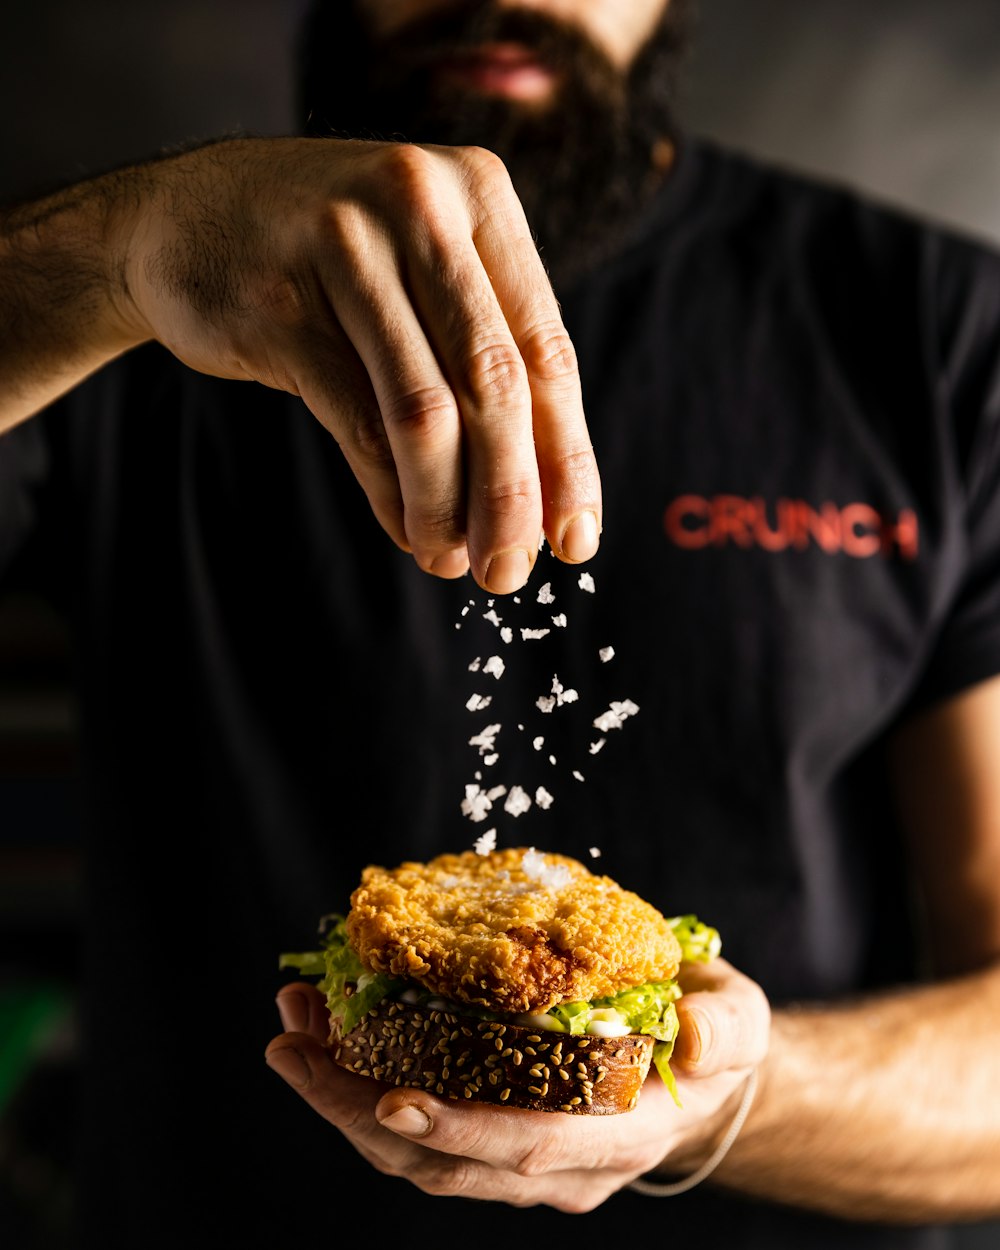 a man is sprinkling seeds on a sandwich